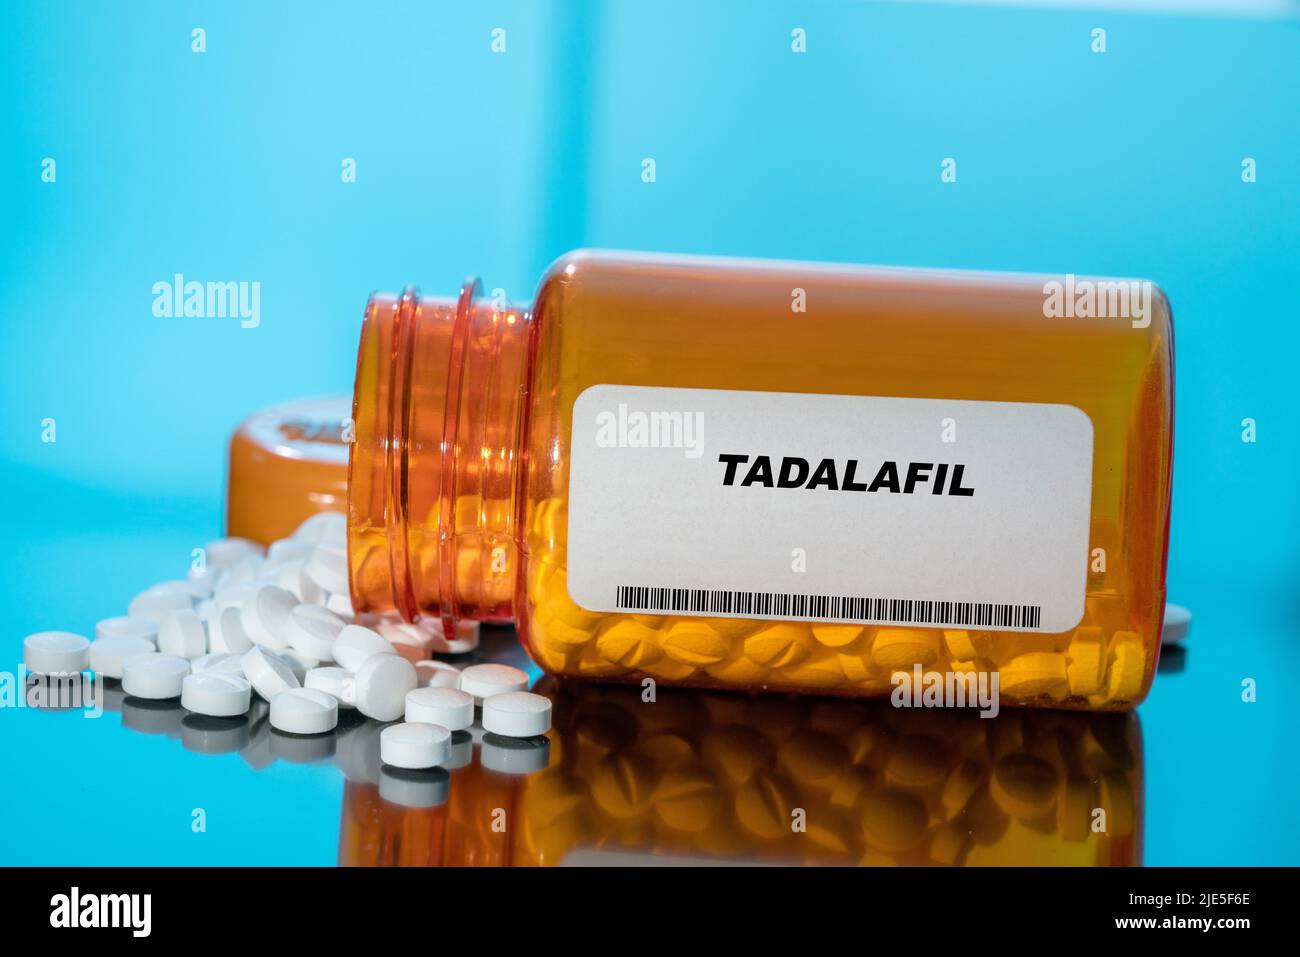 Tadalafil white medical pills and tablets spilling out of a drug bottle. Macro top down view with copy space. Stock Photo